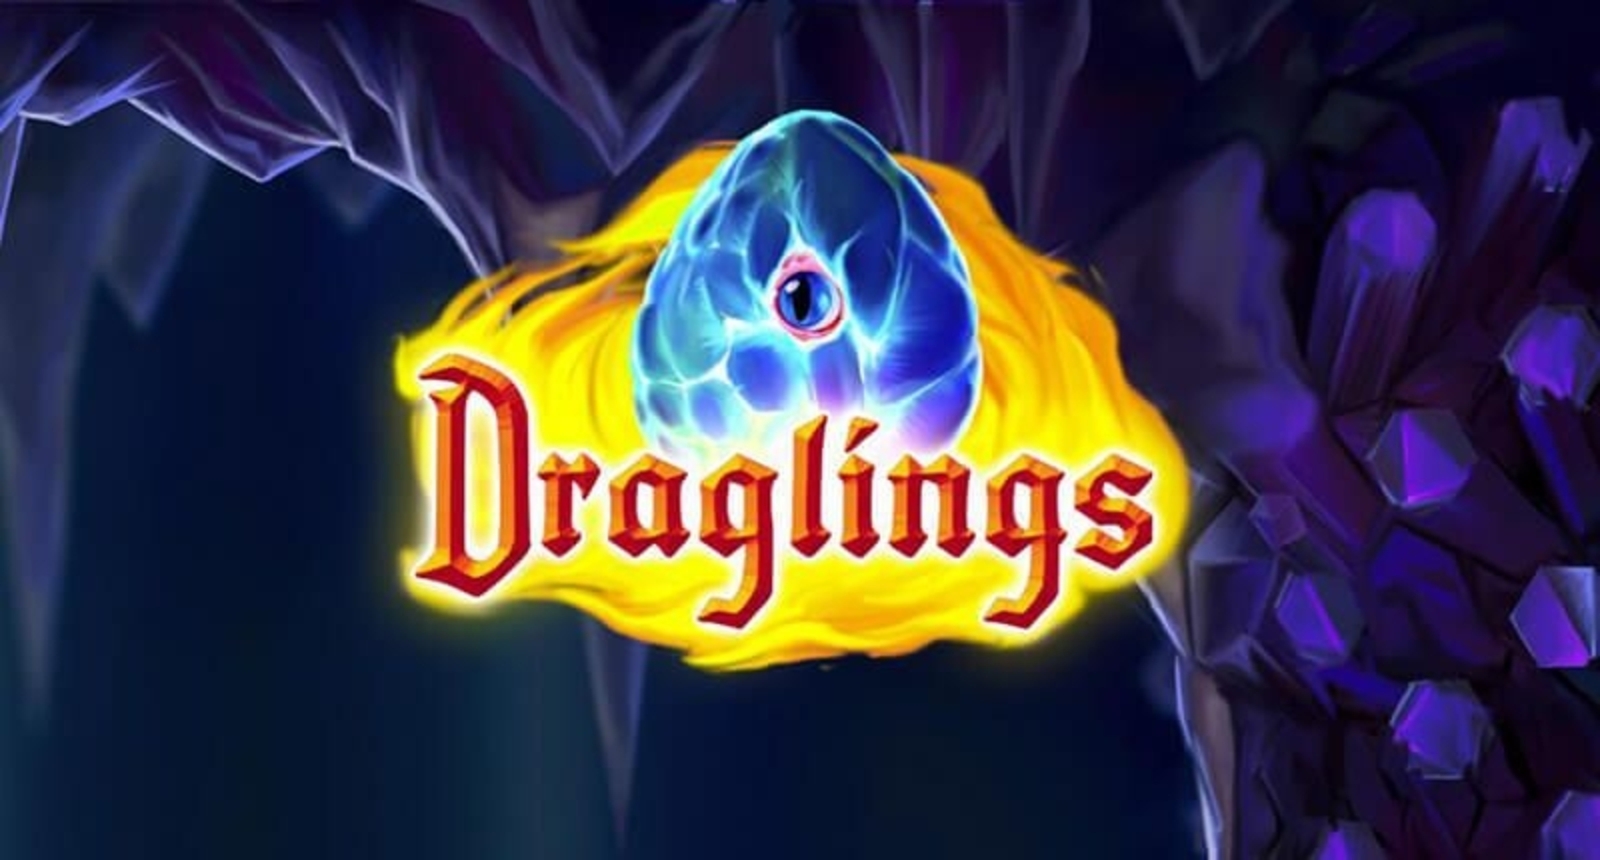 The Draglings Online Slot Demo Game by Yggdrasil Gaming